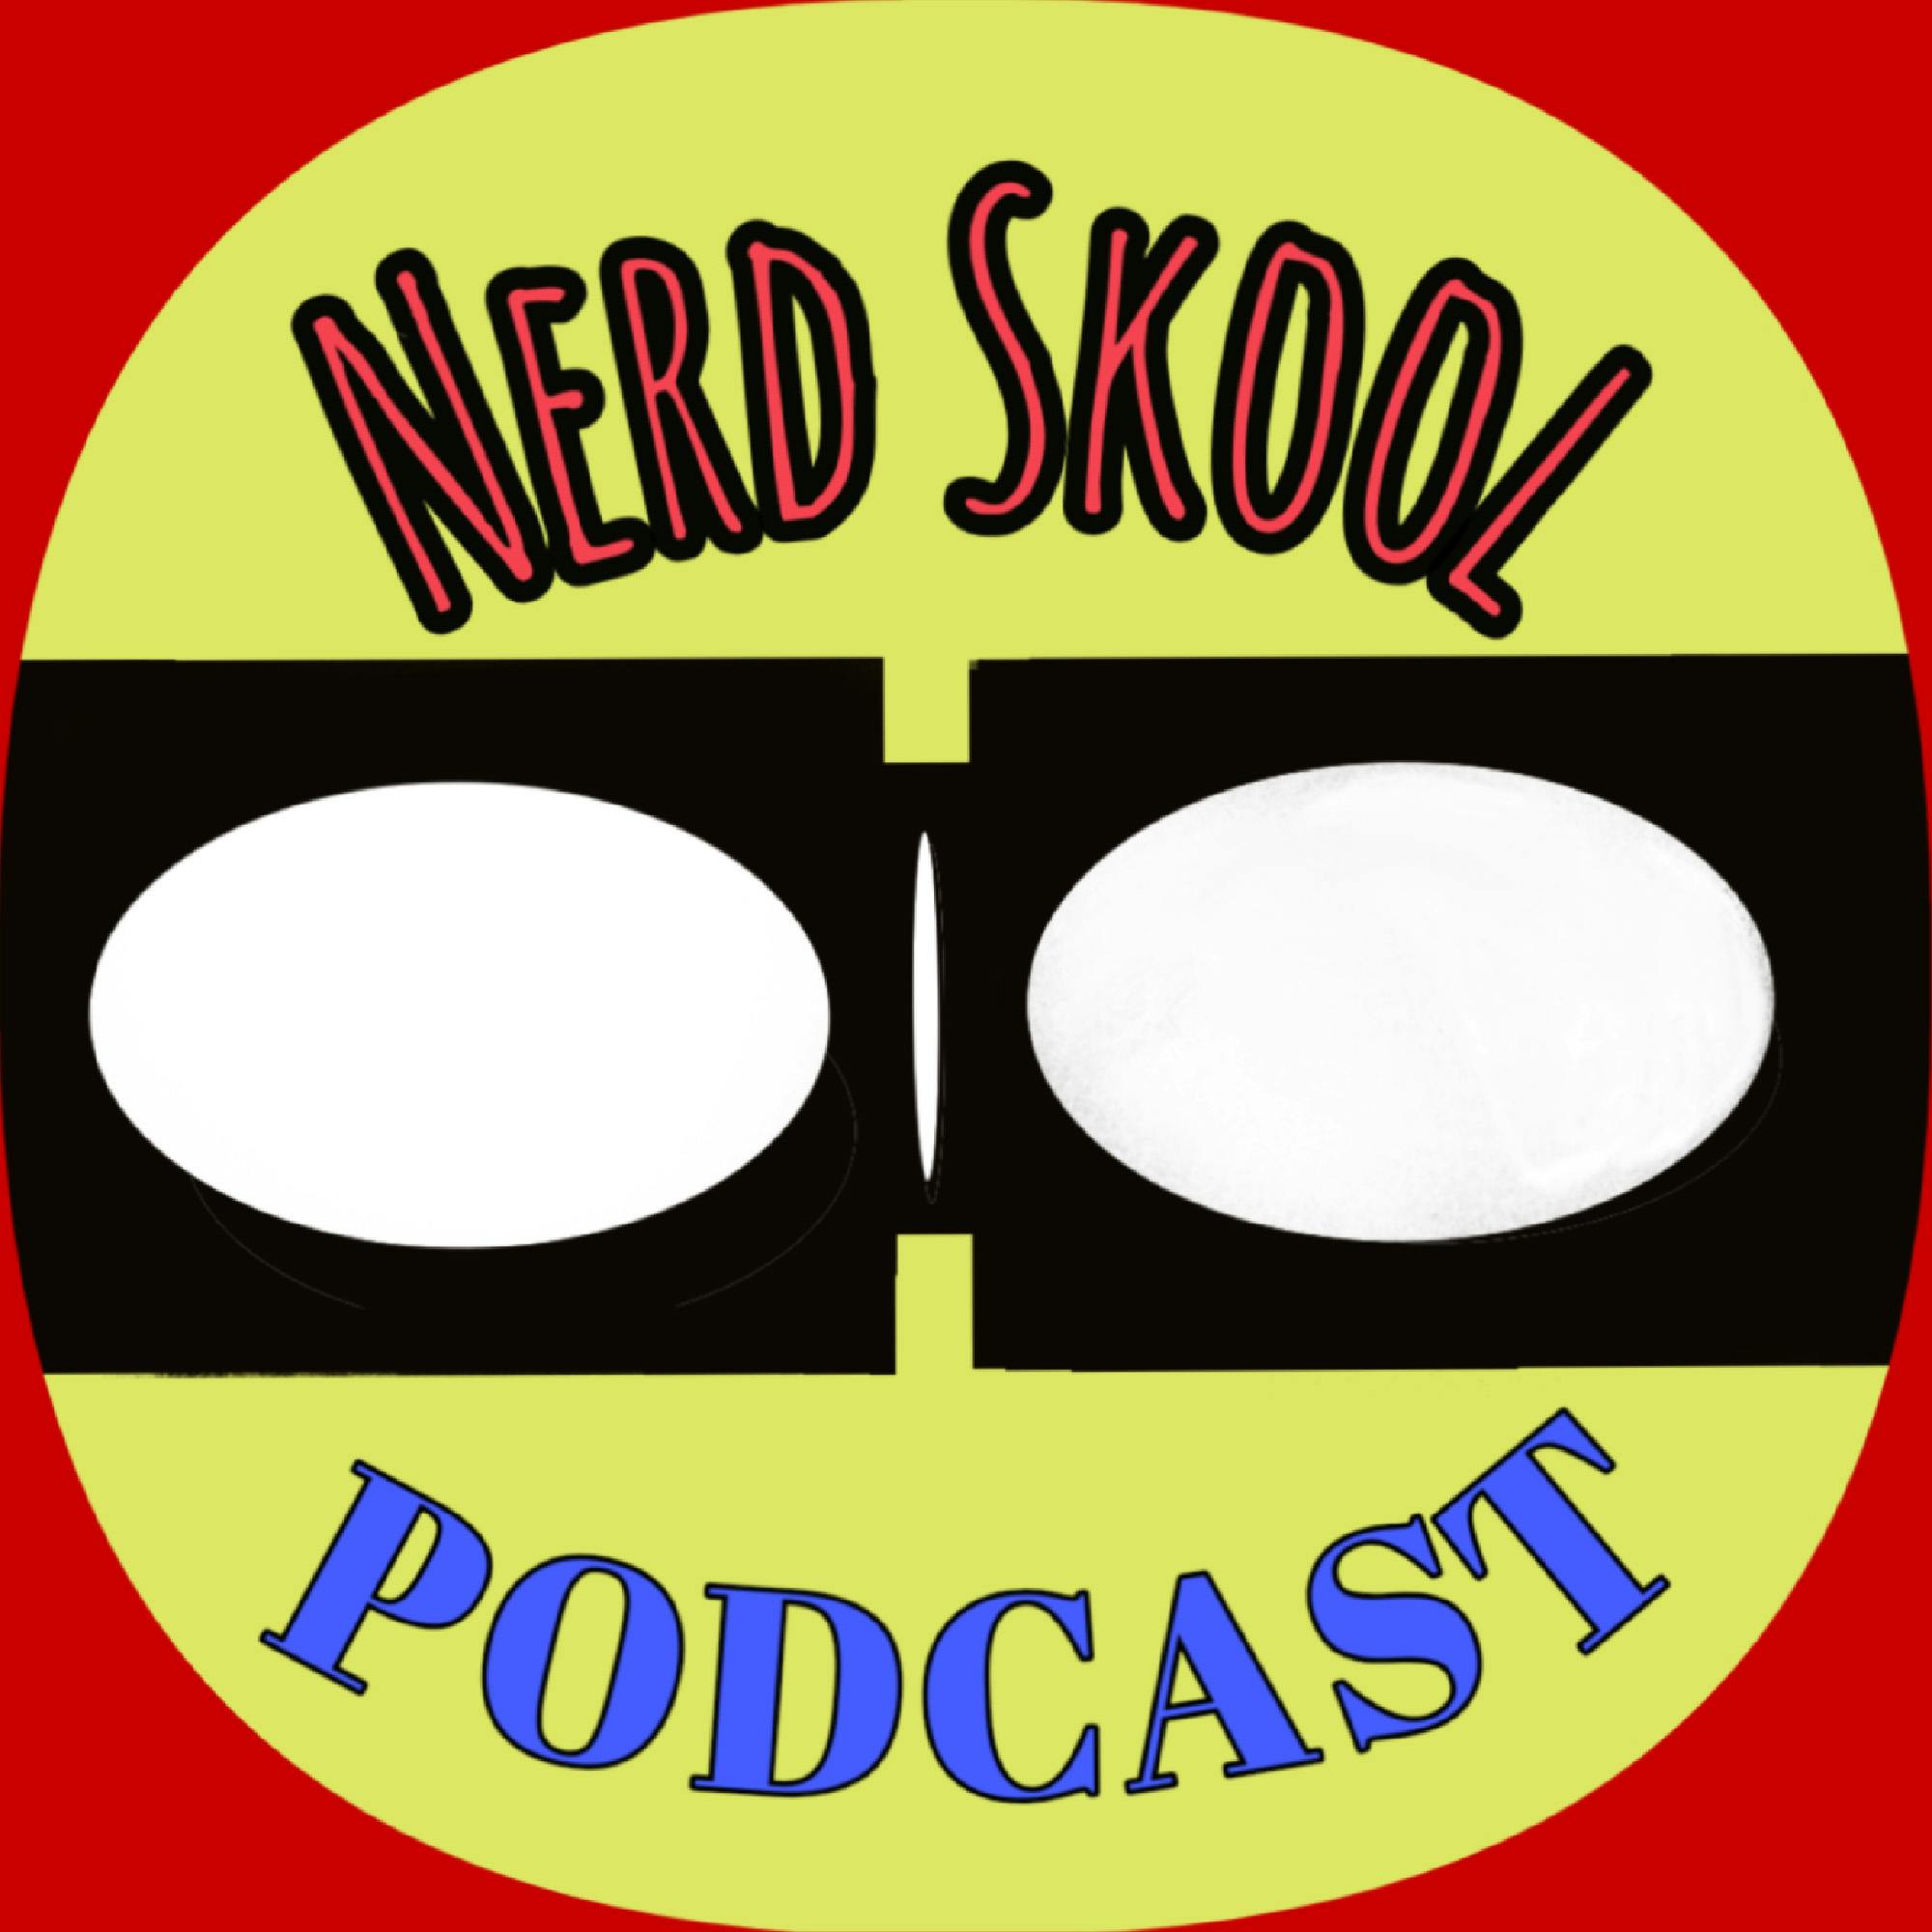 Episode 87: Heroes Con 23 Preview & Avengers Infinity War Part 1 (RIP Iron Sheik)